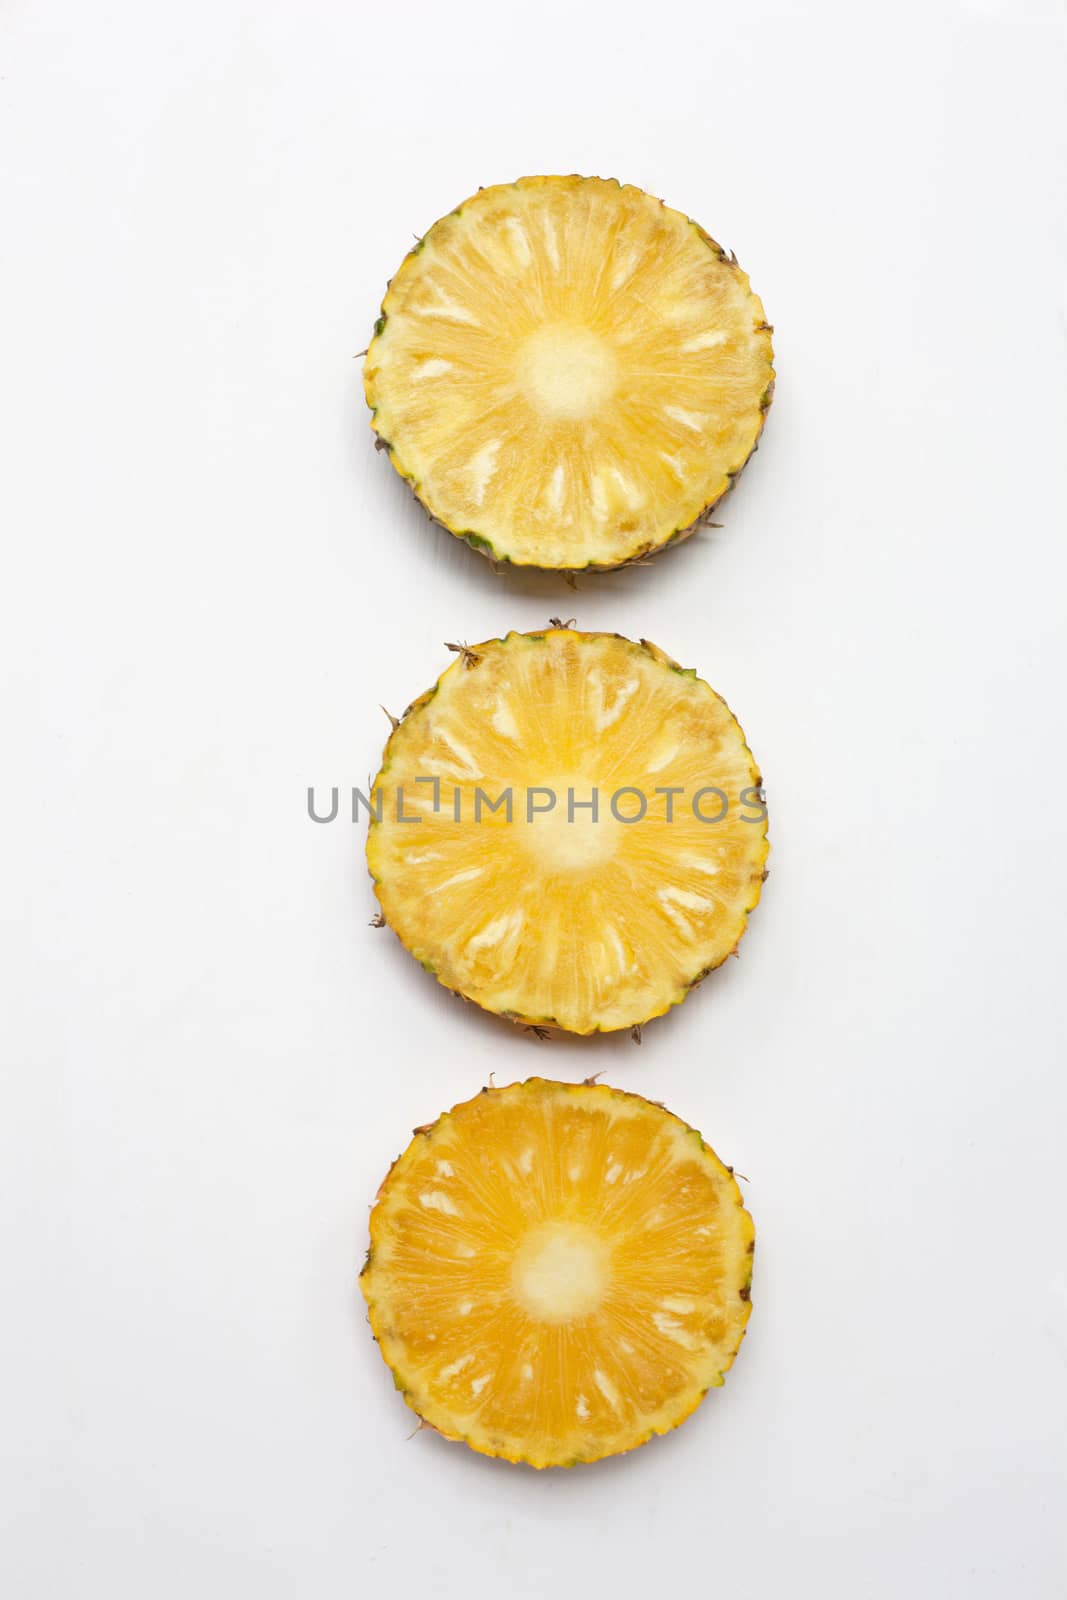 Slices of pineapple  isolated on white background.